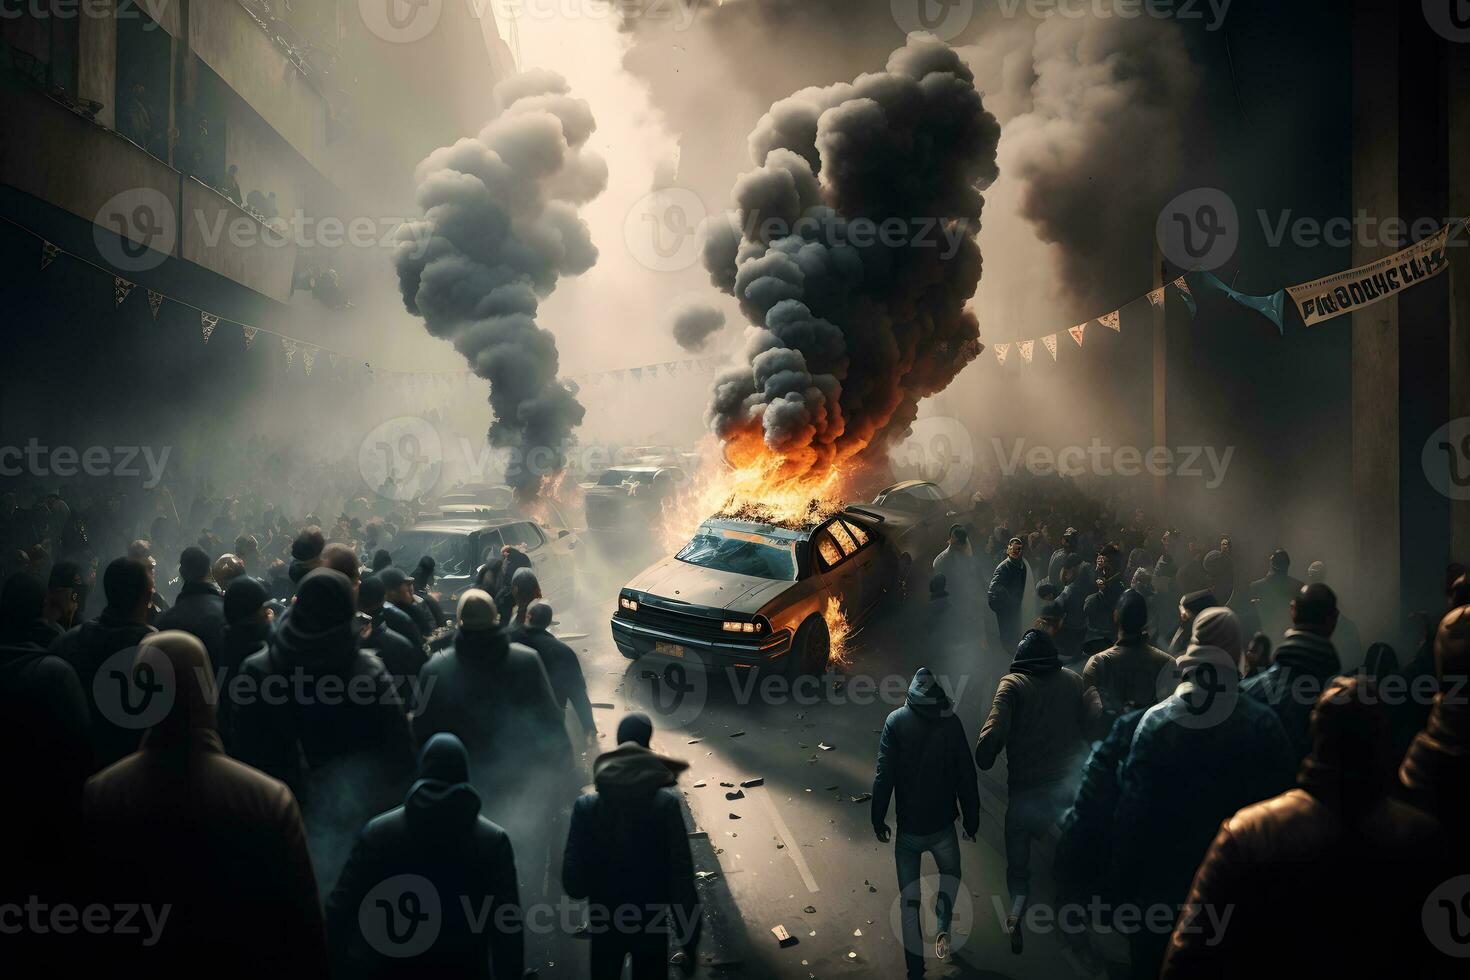 The crowd riots in the street, protests. burning city. Neural network generated art photo